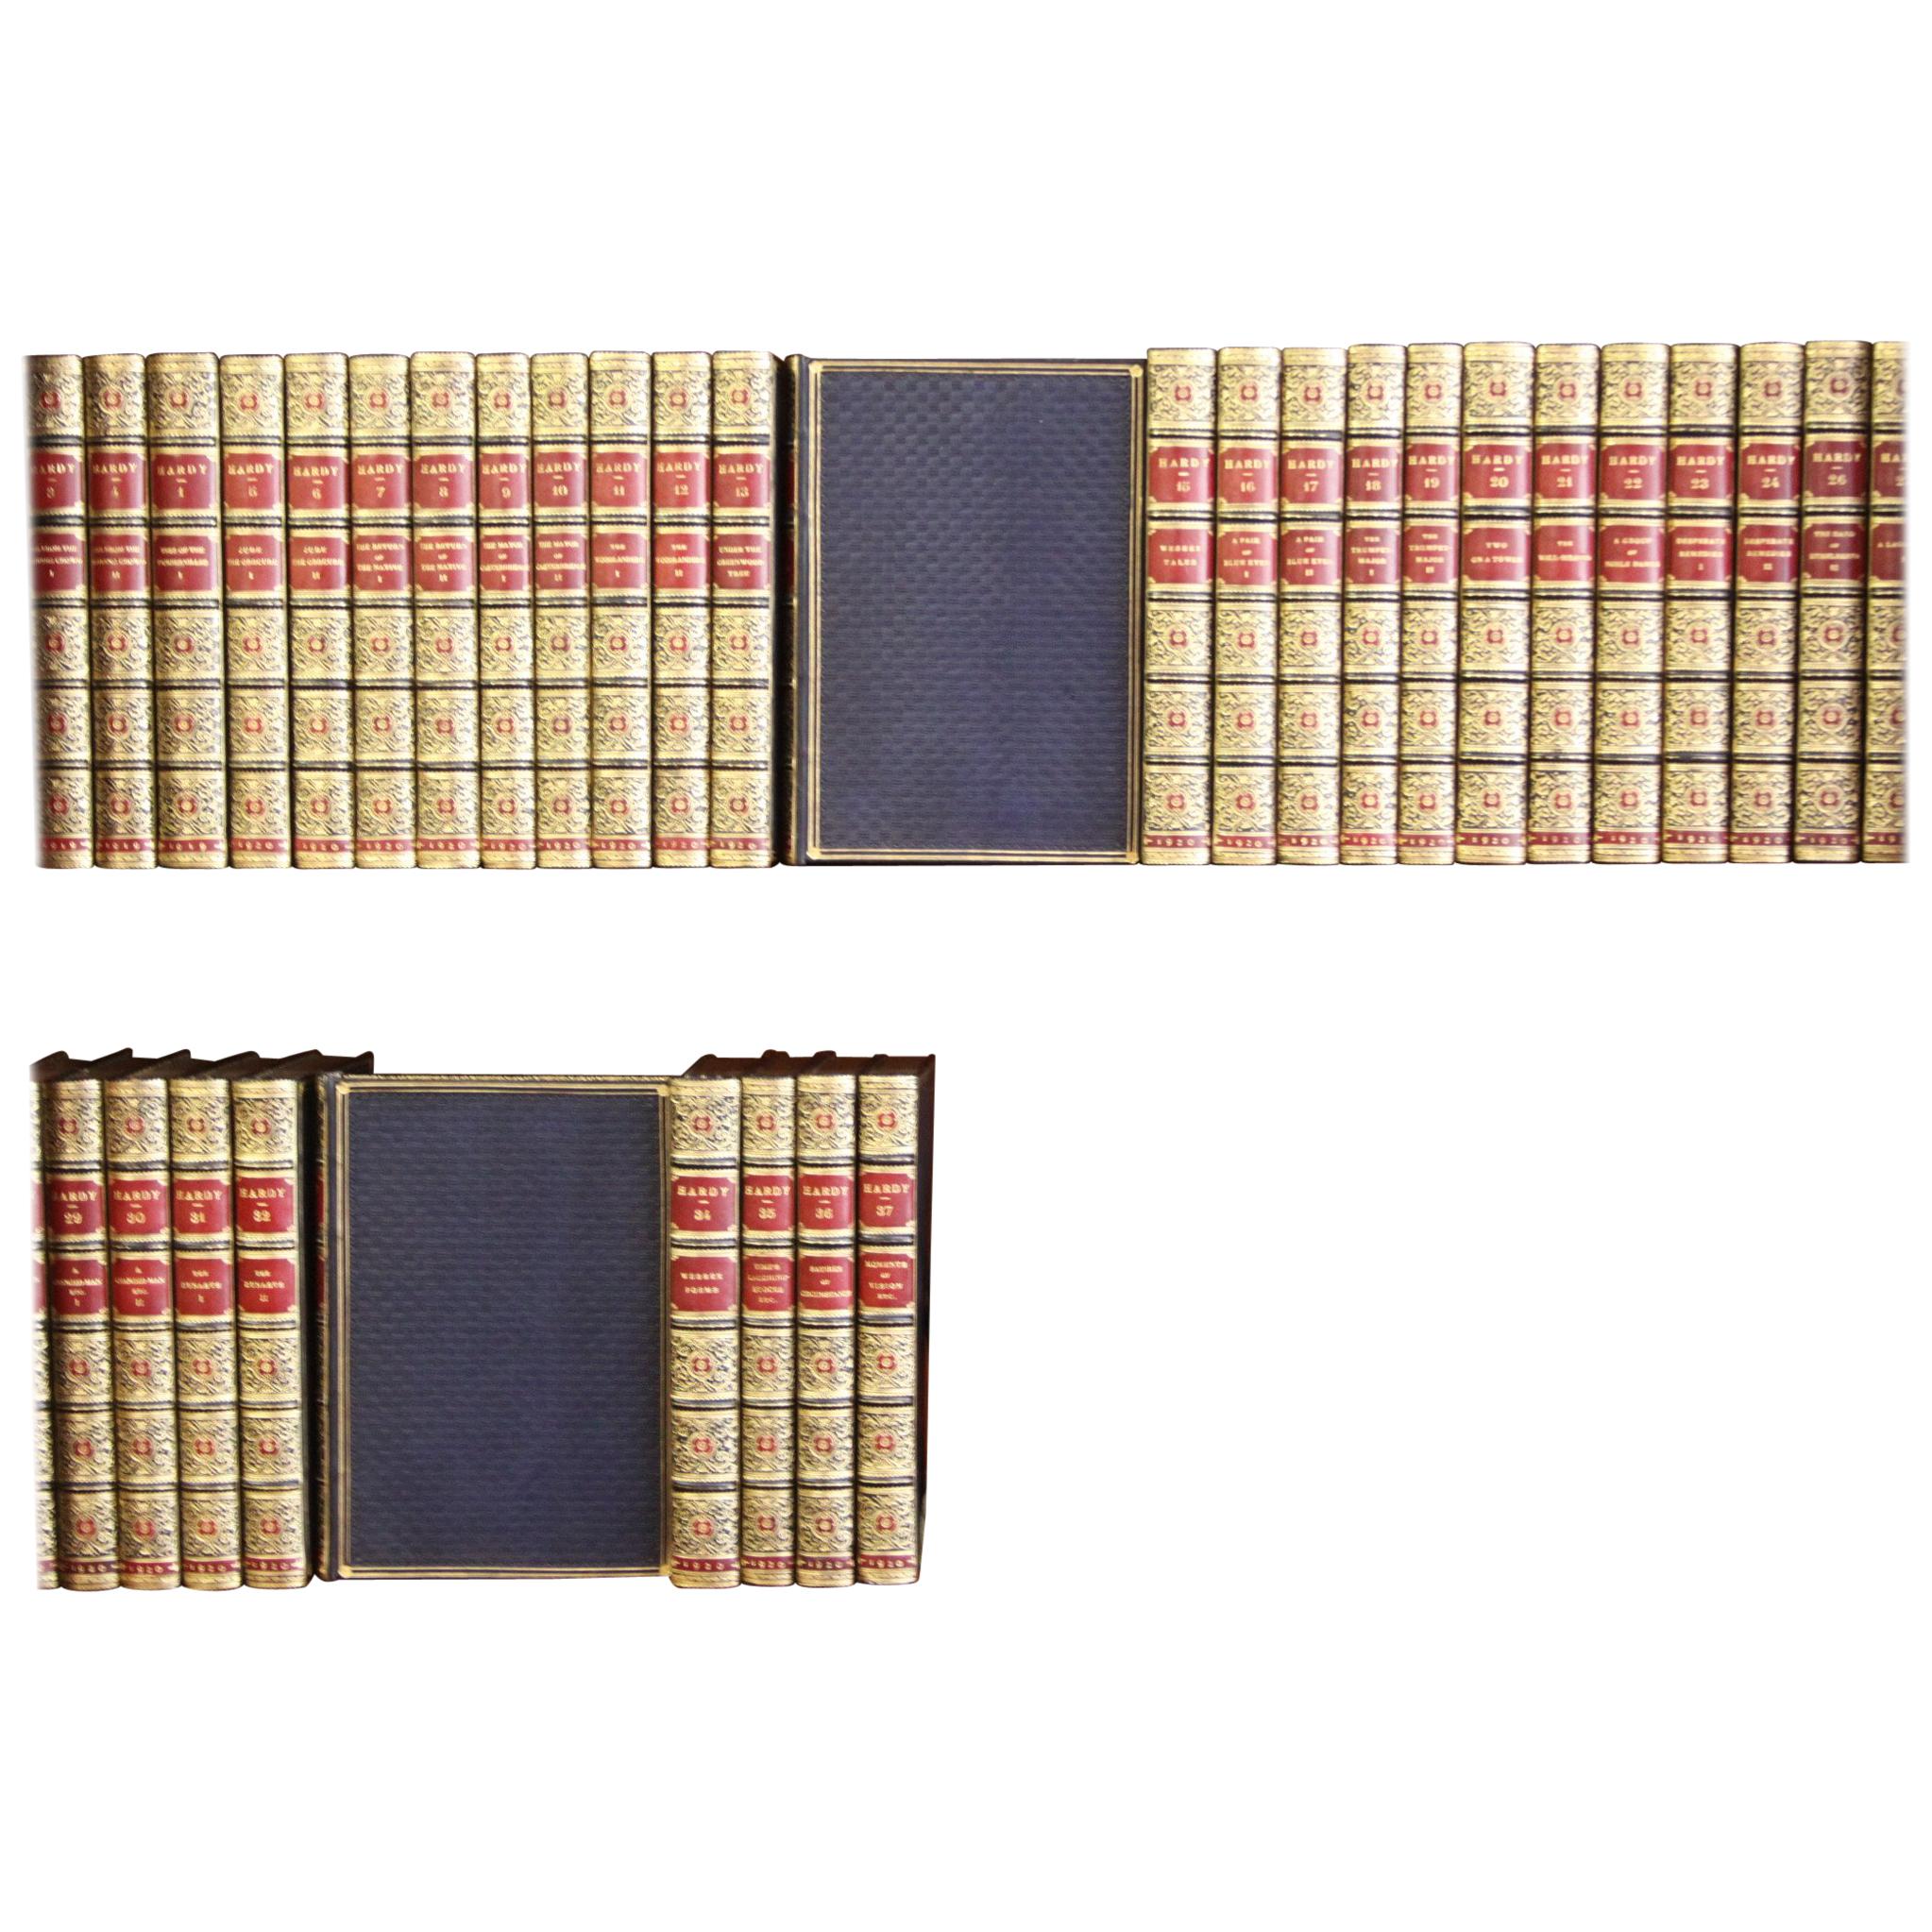 Books Thomas Hardy Writings Collections, Leather-bound Antiques Bindings